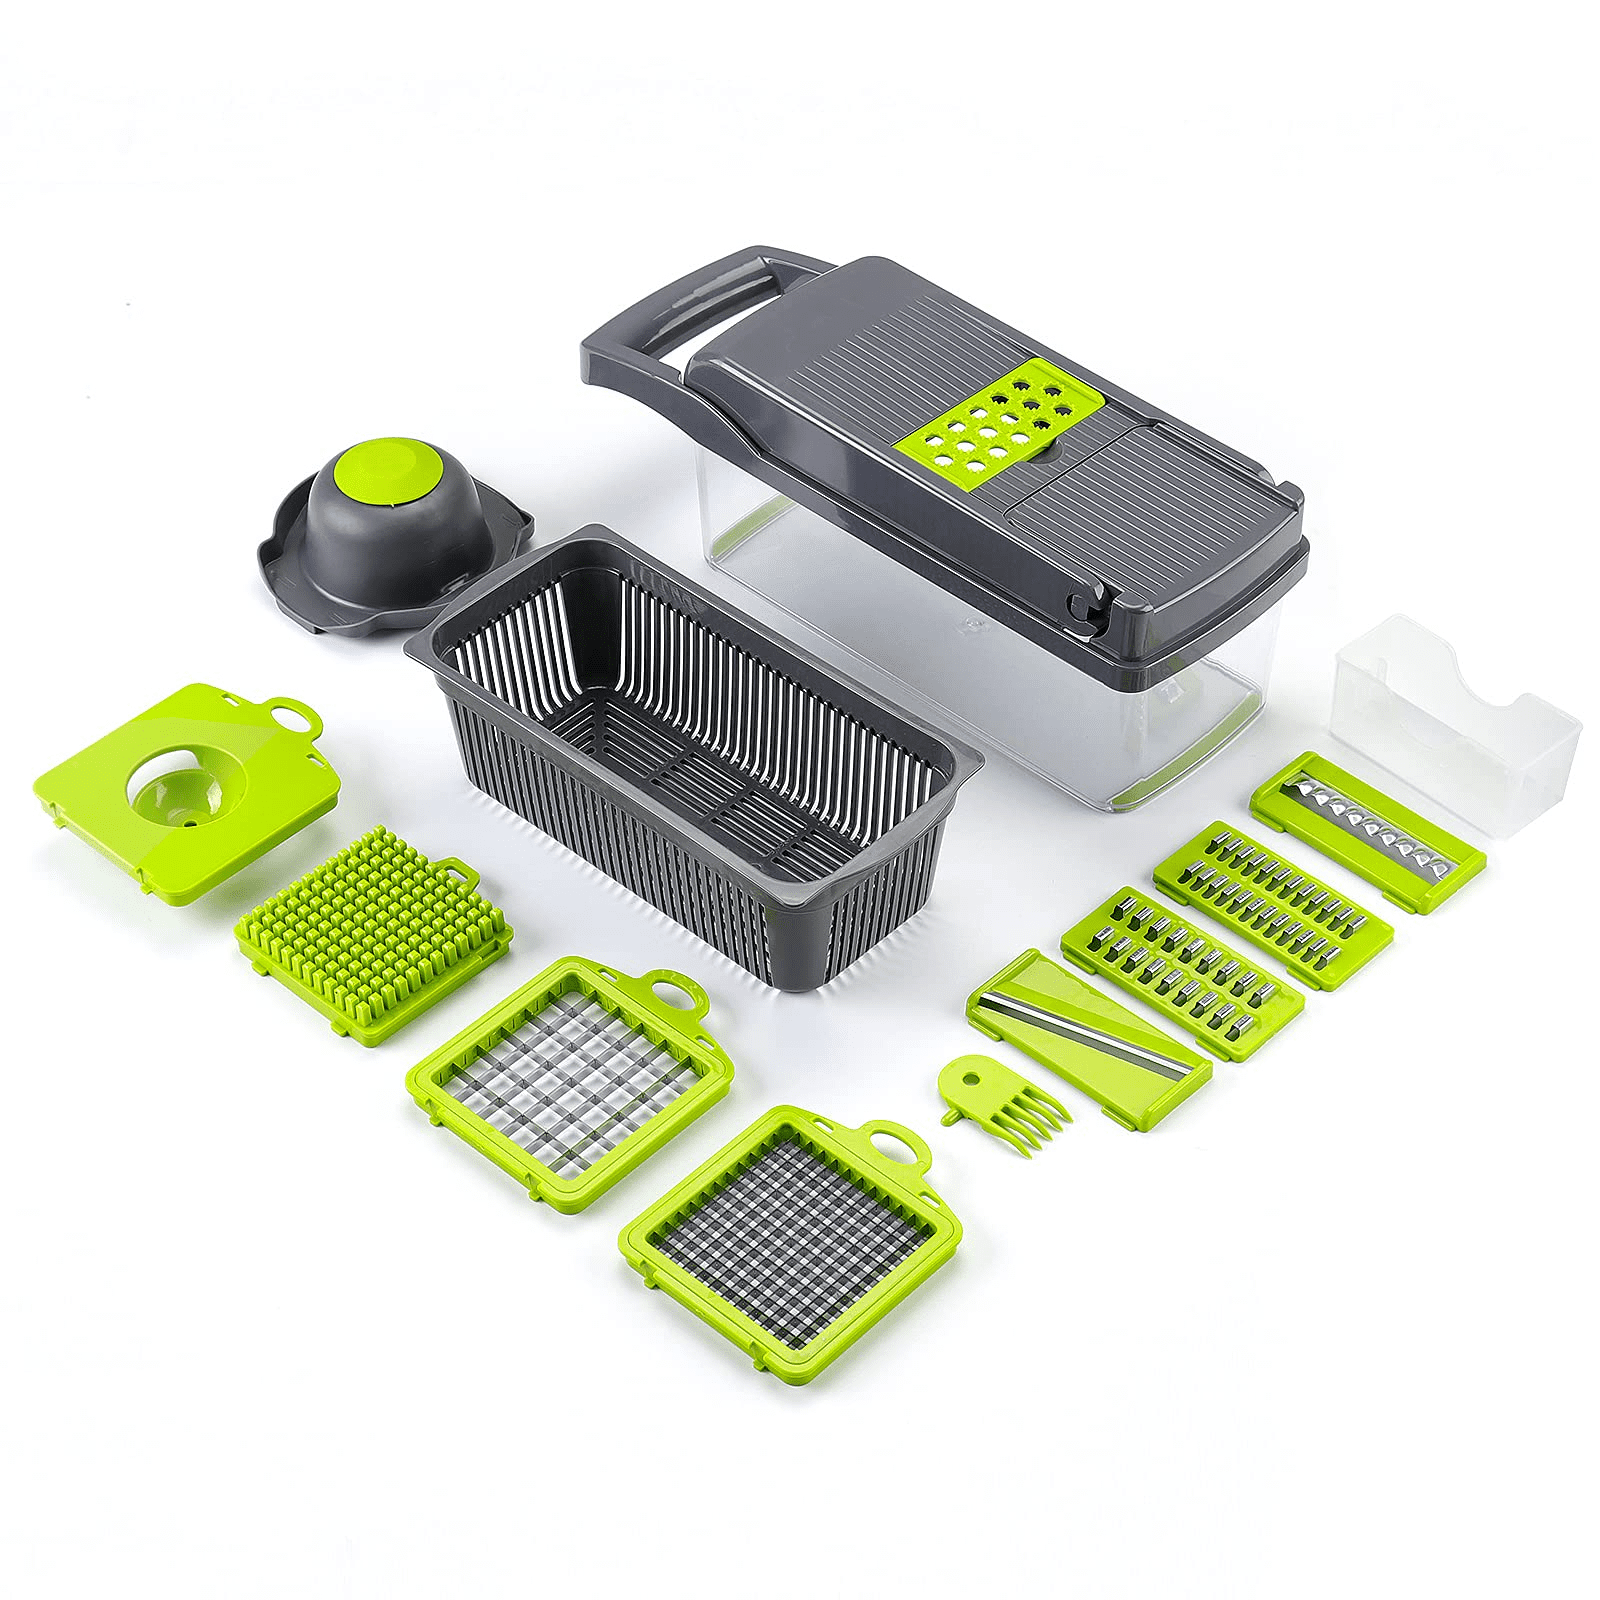 LIHUYAS 12 in 1 Pro Vegetable Chopper with Container, Multifunctional  Veggie Chopper Dicer,Salad Chopper Box, Mandoline Slicer,Food Chopper with  Sharp